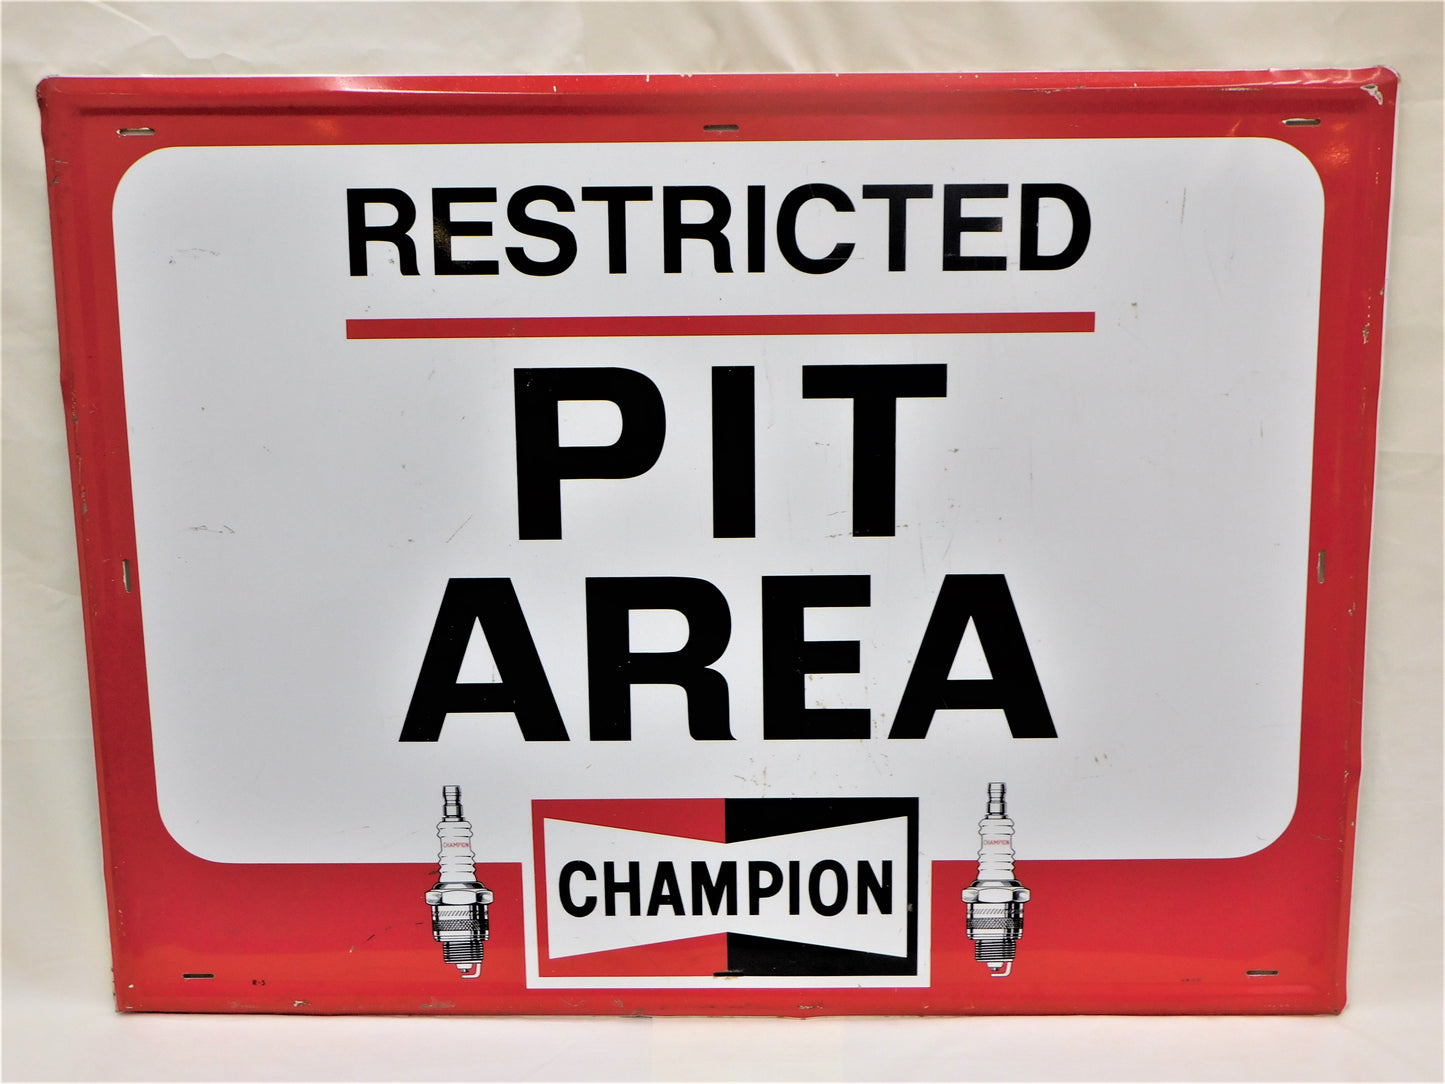 1977 Champion Restricted Pit Area Sign